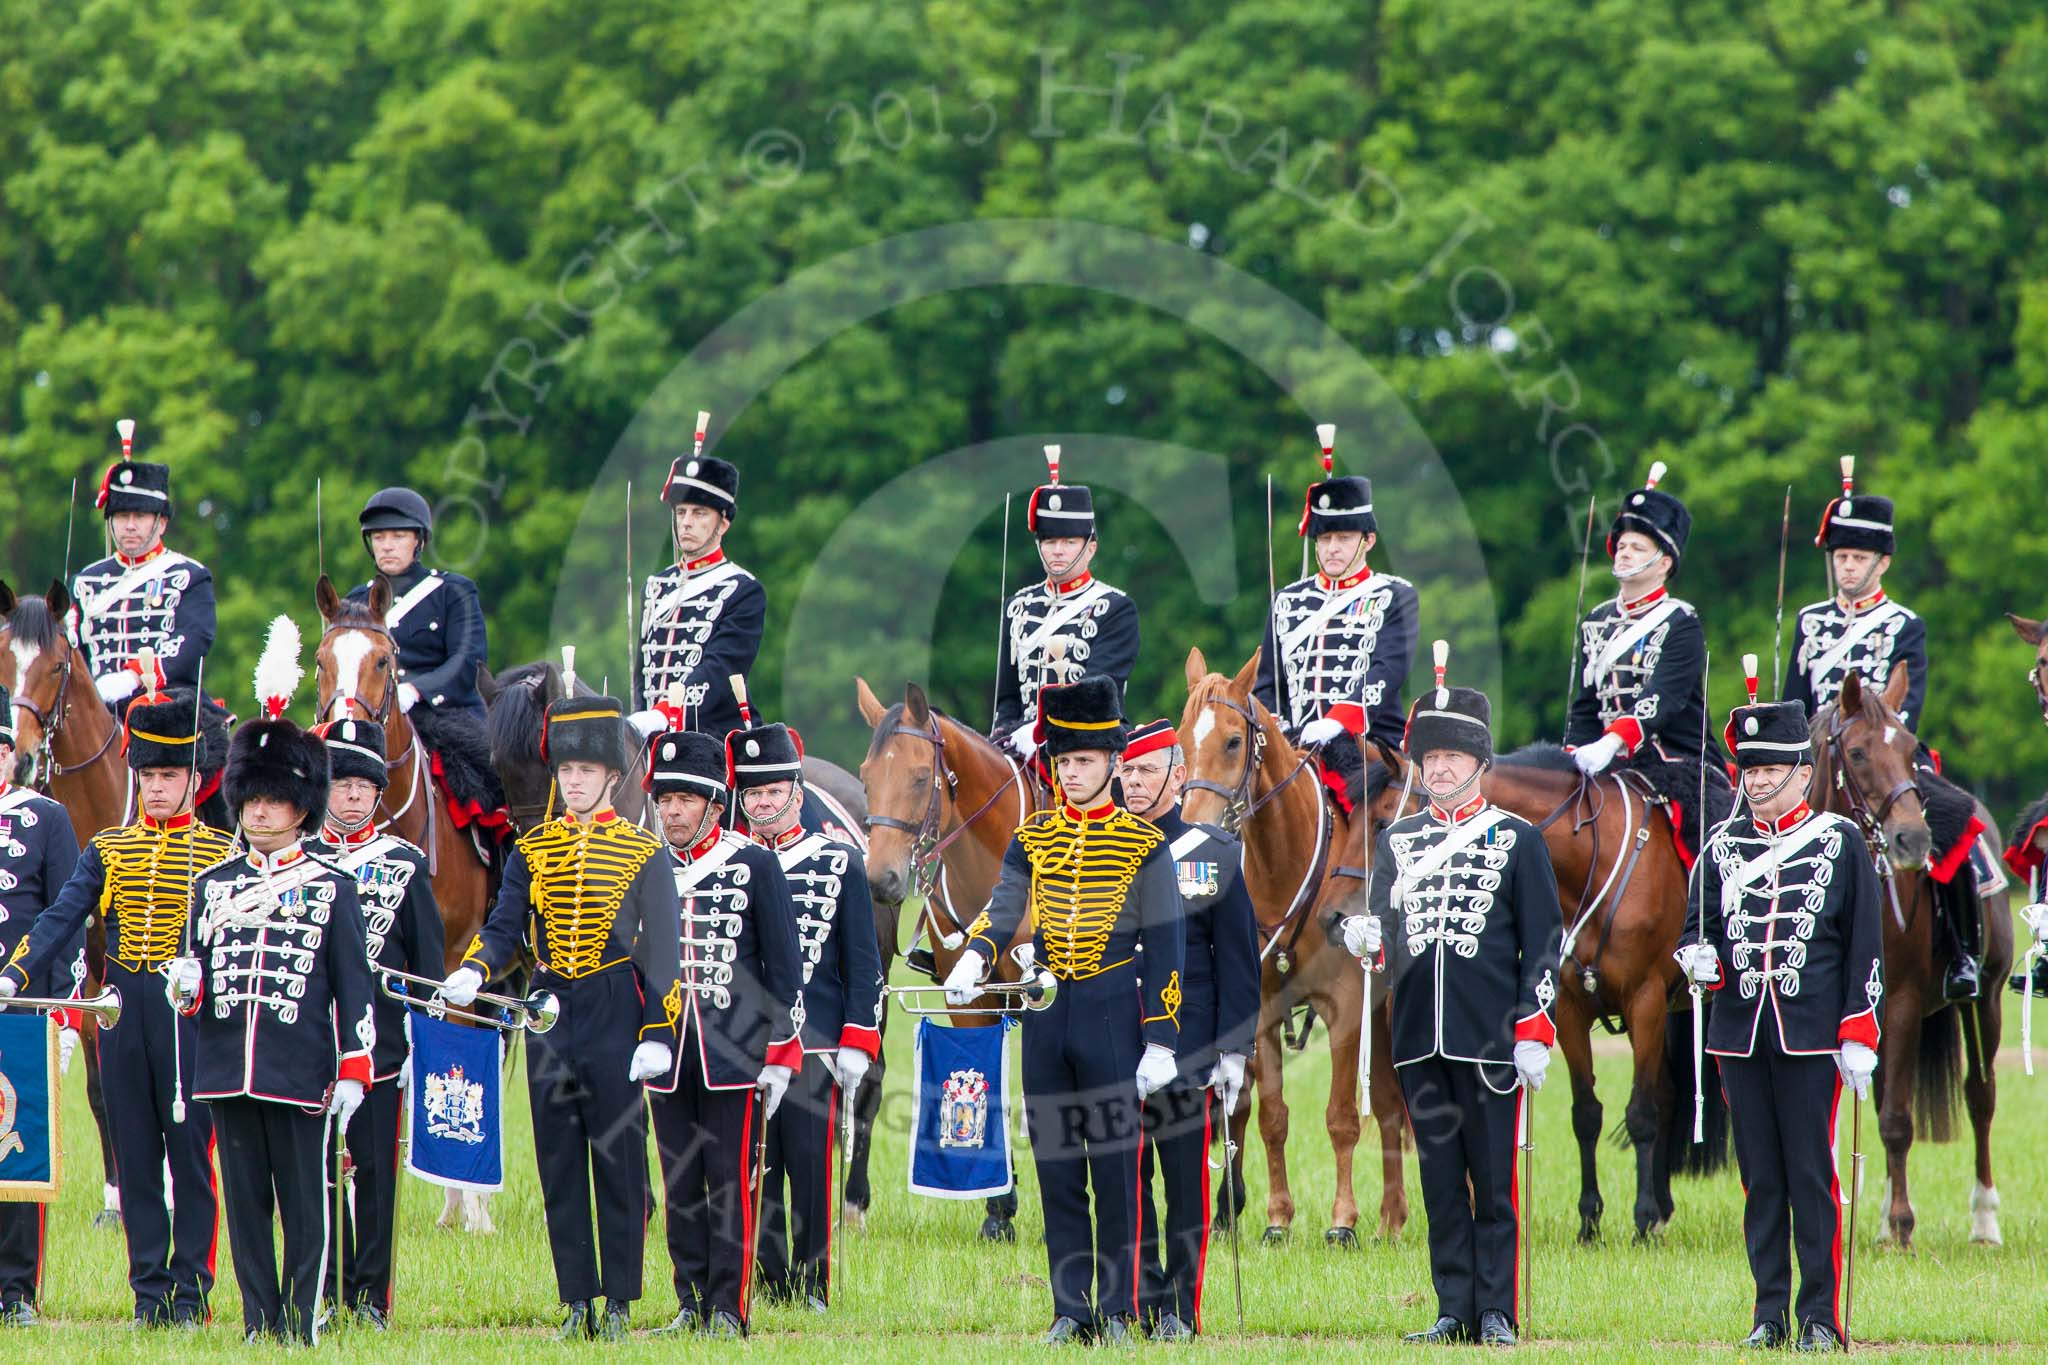 The Light Cavalry HAC Annual Review and Inspection 2013.
Windsor Great Park Review Ground,
Windsor,
Berkshire,
United Kingdom,
on 09 June 2013 at 13:38, image #472